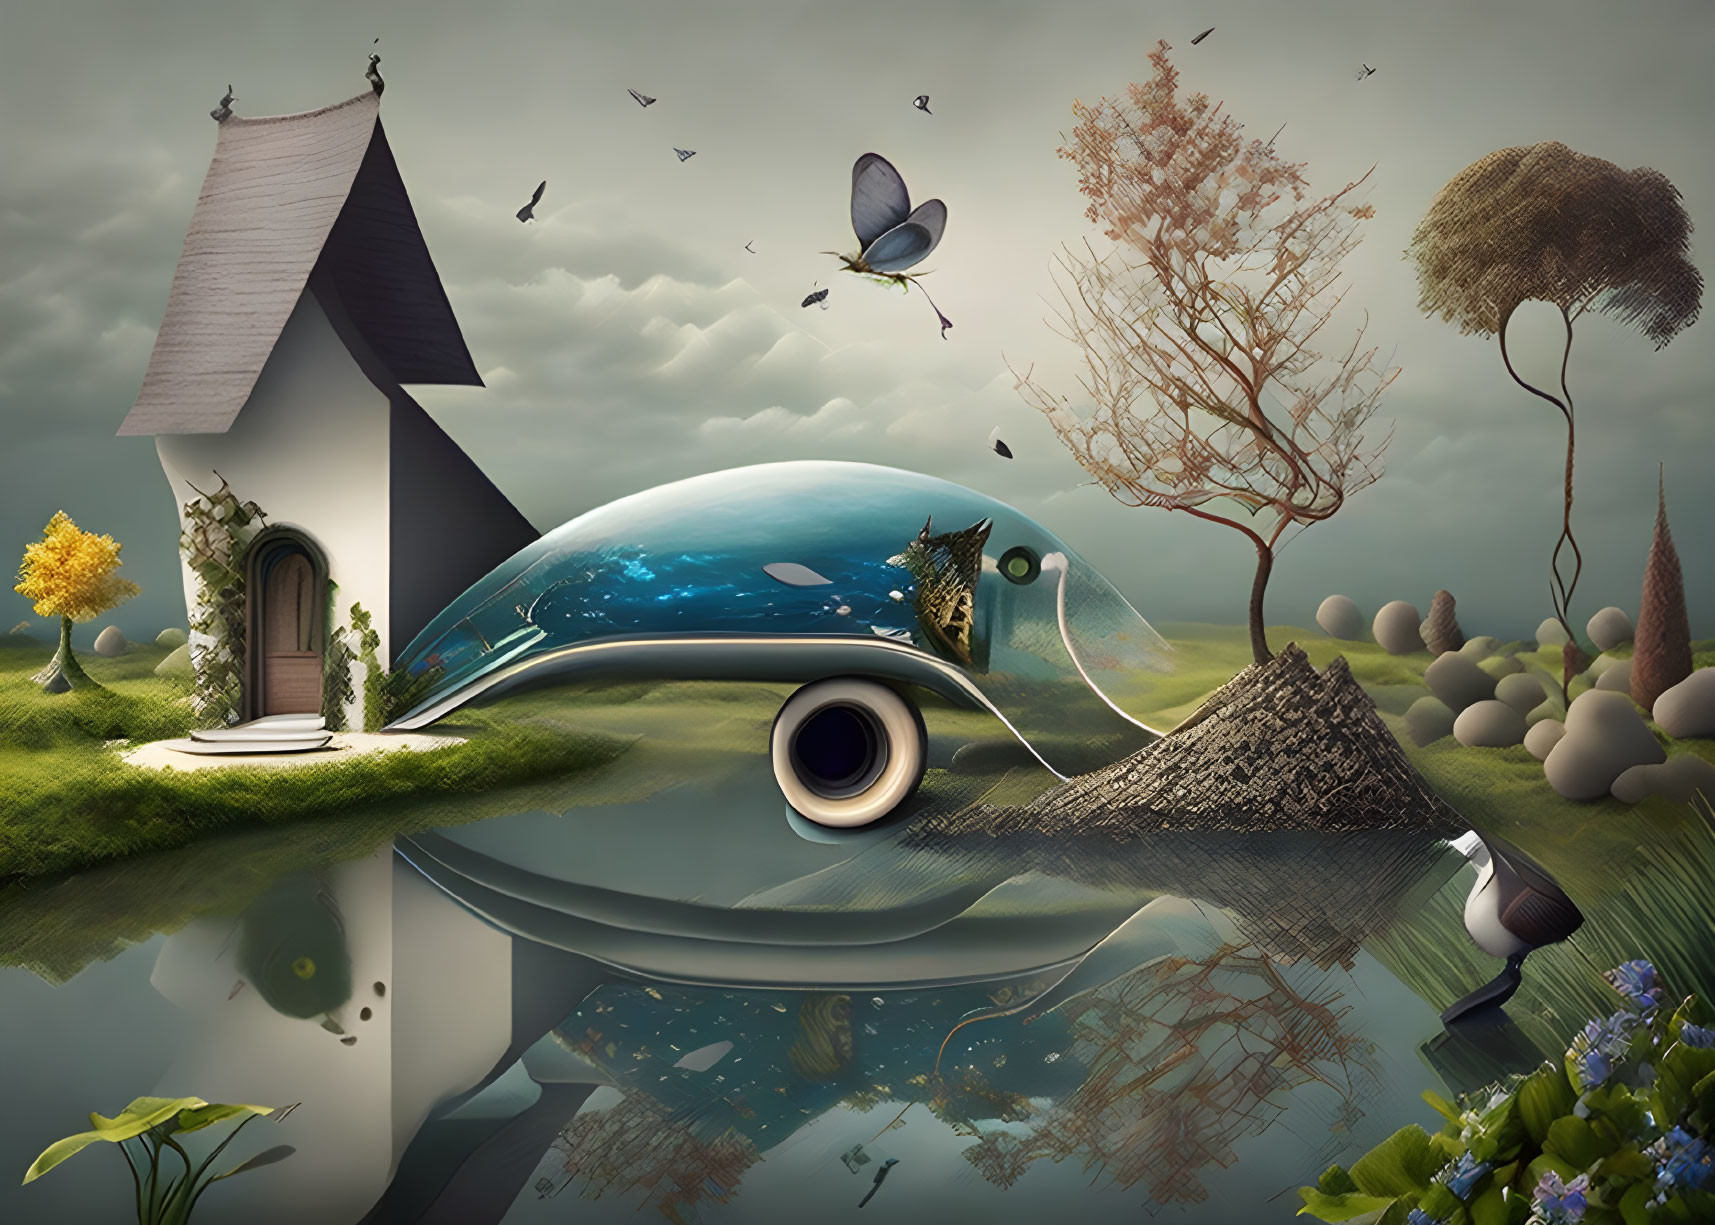 Surrealist landscape with small house, reflective water, flying birds, large eye, tree, butterfly